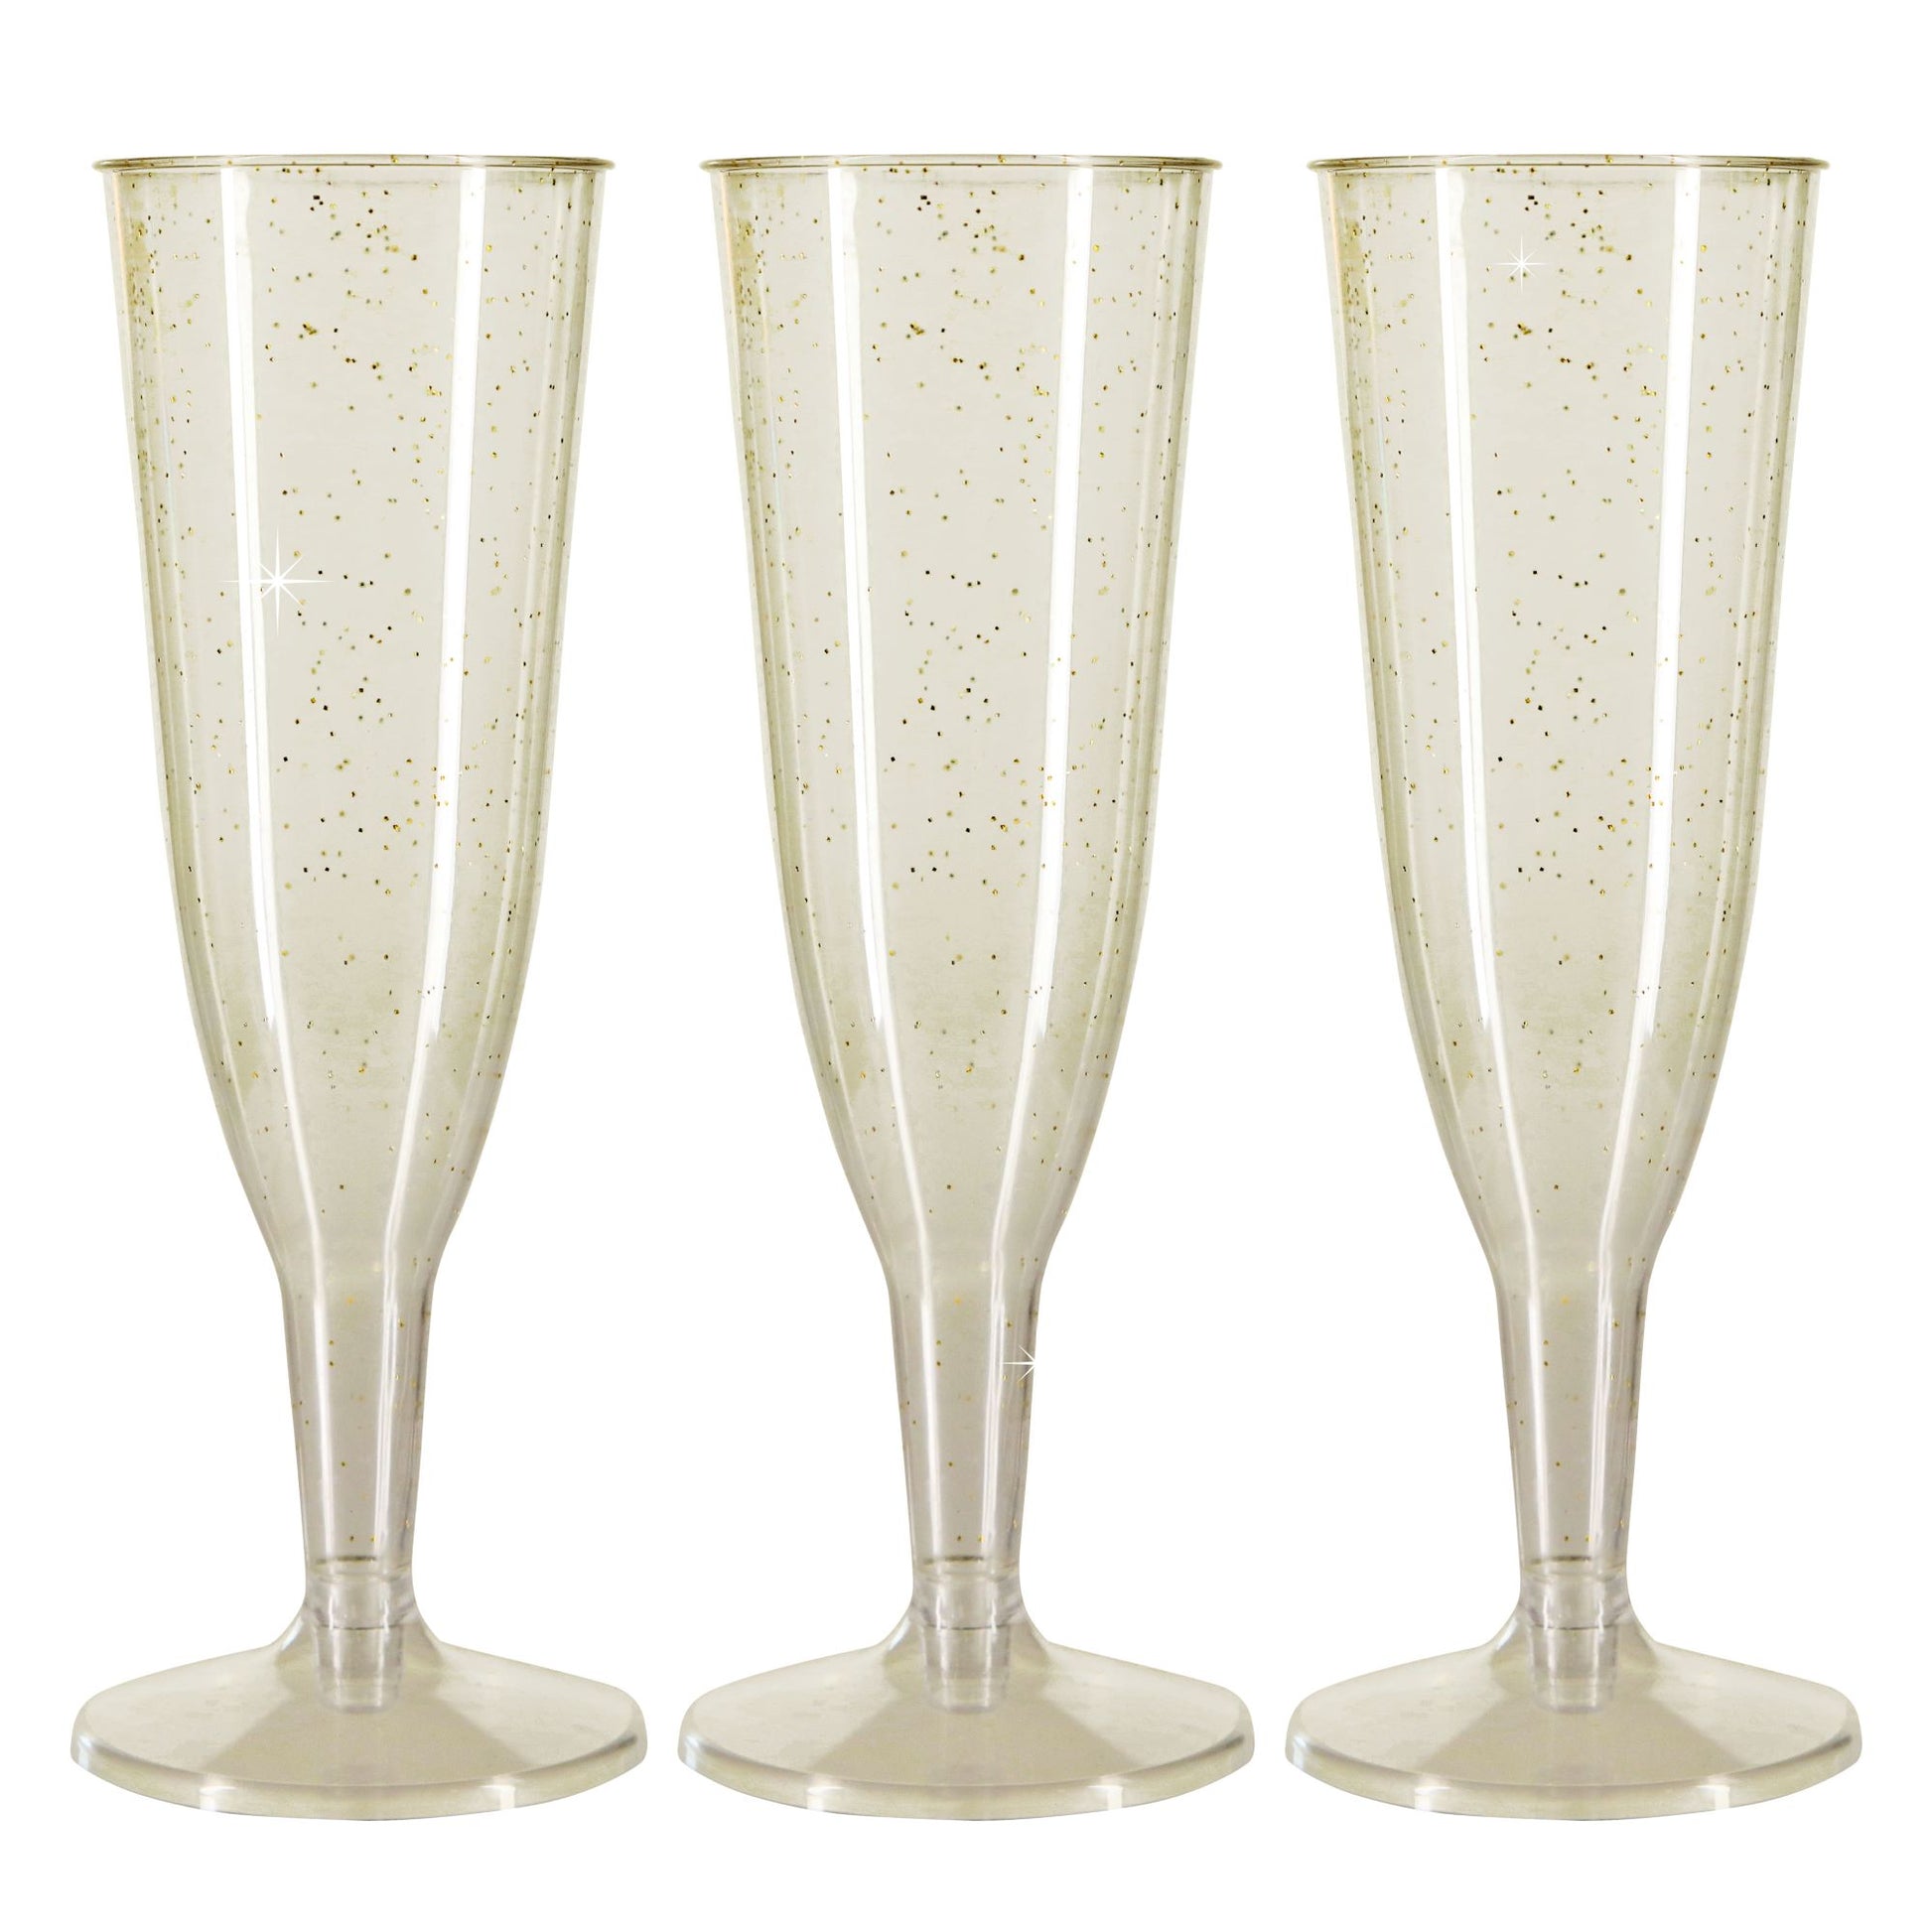 6 x Gold Glitter Prosecco Flutes - Disposable, Recyclable Polystyrene Material - Transparent 2-Piece Champagne Glasses Parties Celebrations-5056020179740-PCUP-CHAMP2p-GG-10-Product Pro-Champagne Glasses, Clear Champagne Glasses, Gold Glitter, Plastic Flutes, Prosecco Flutes